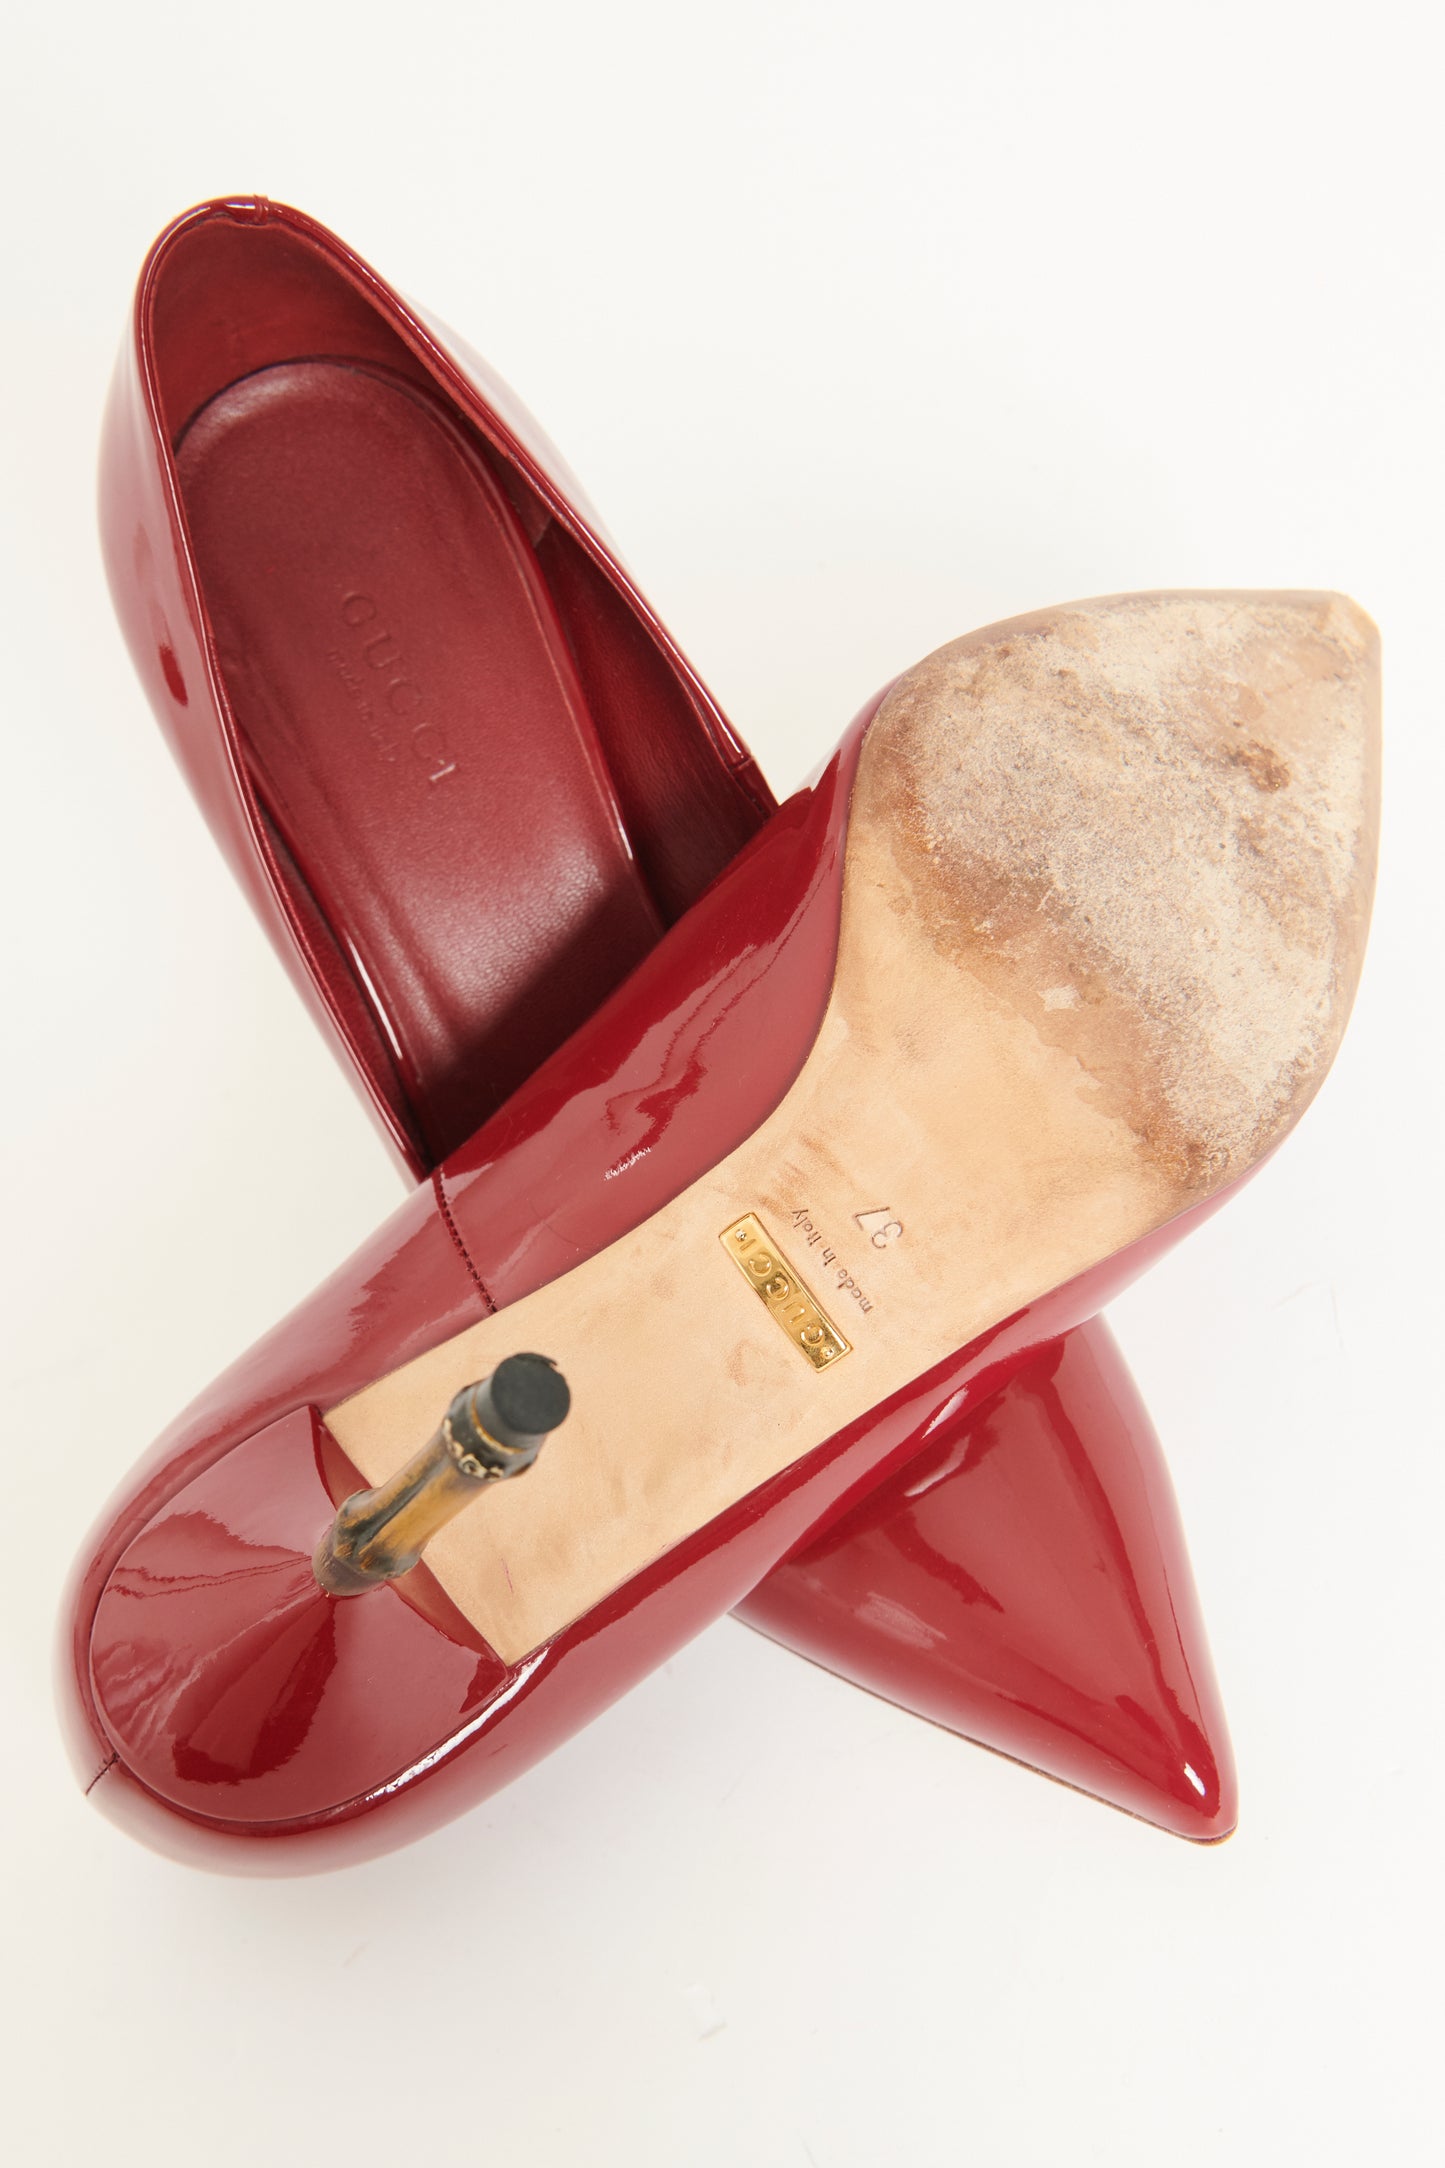 Burgundy Patent Leather Preowned Kristen Bamboo Pumps